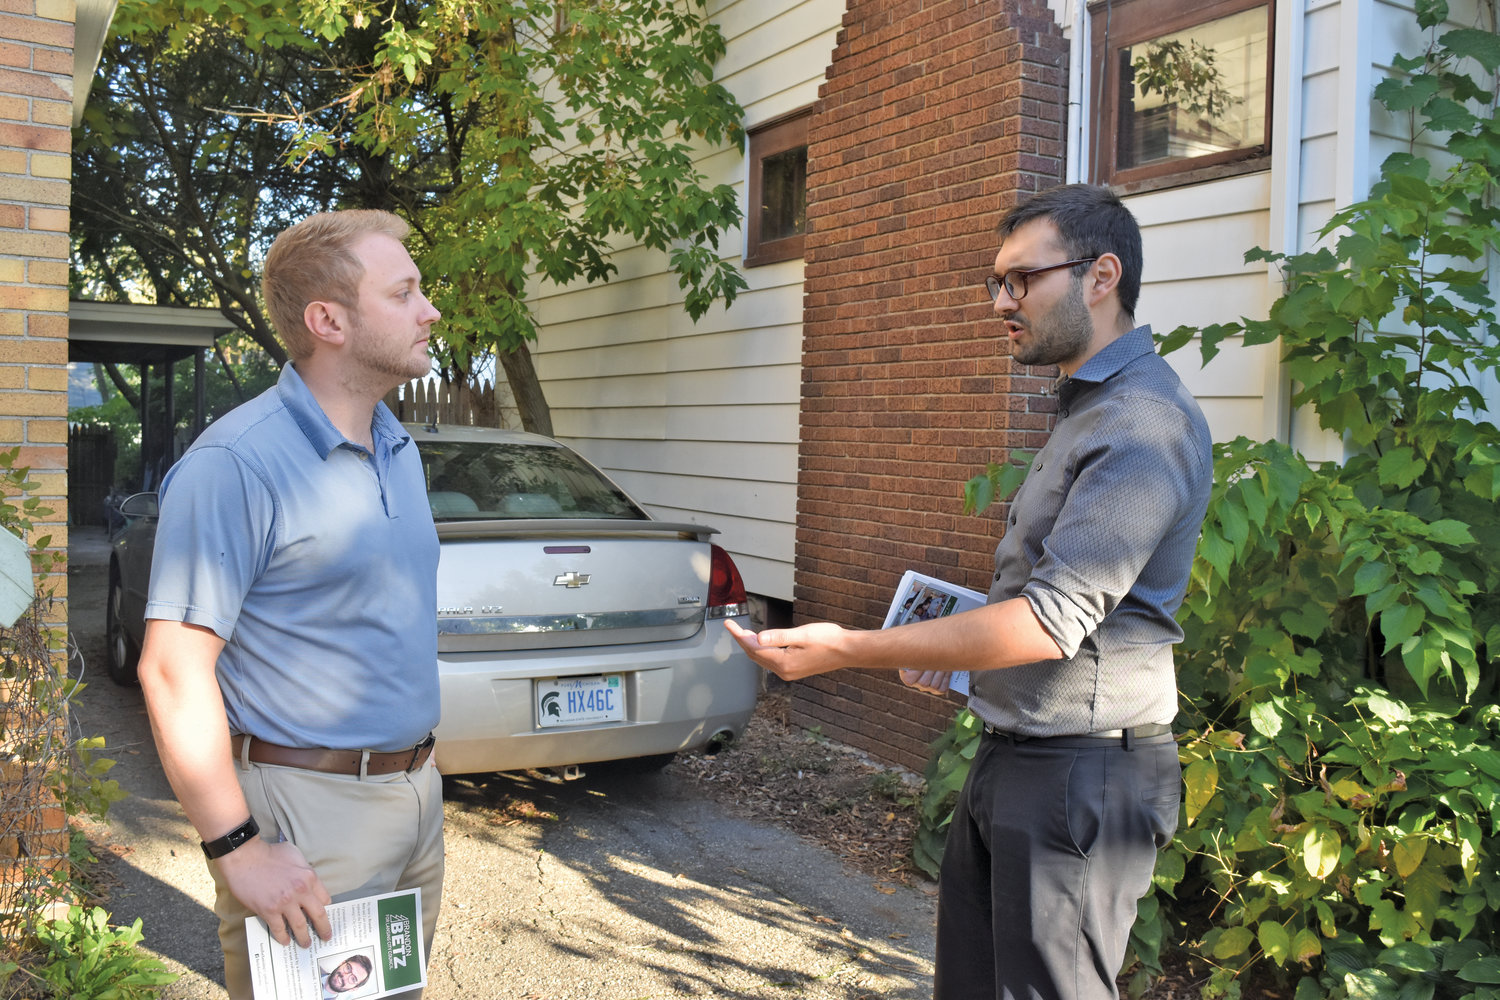 Councilman Brandon Betz (right) talks to a voter on the campaign trail.